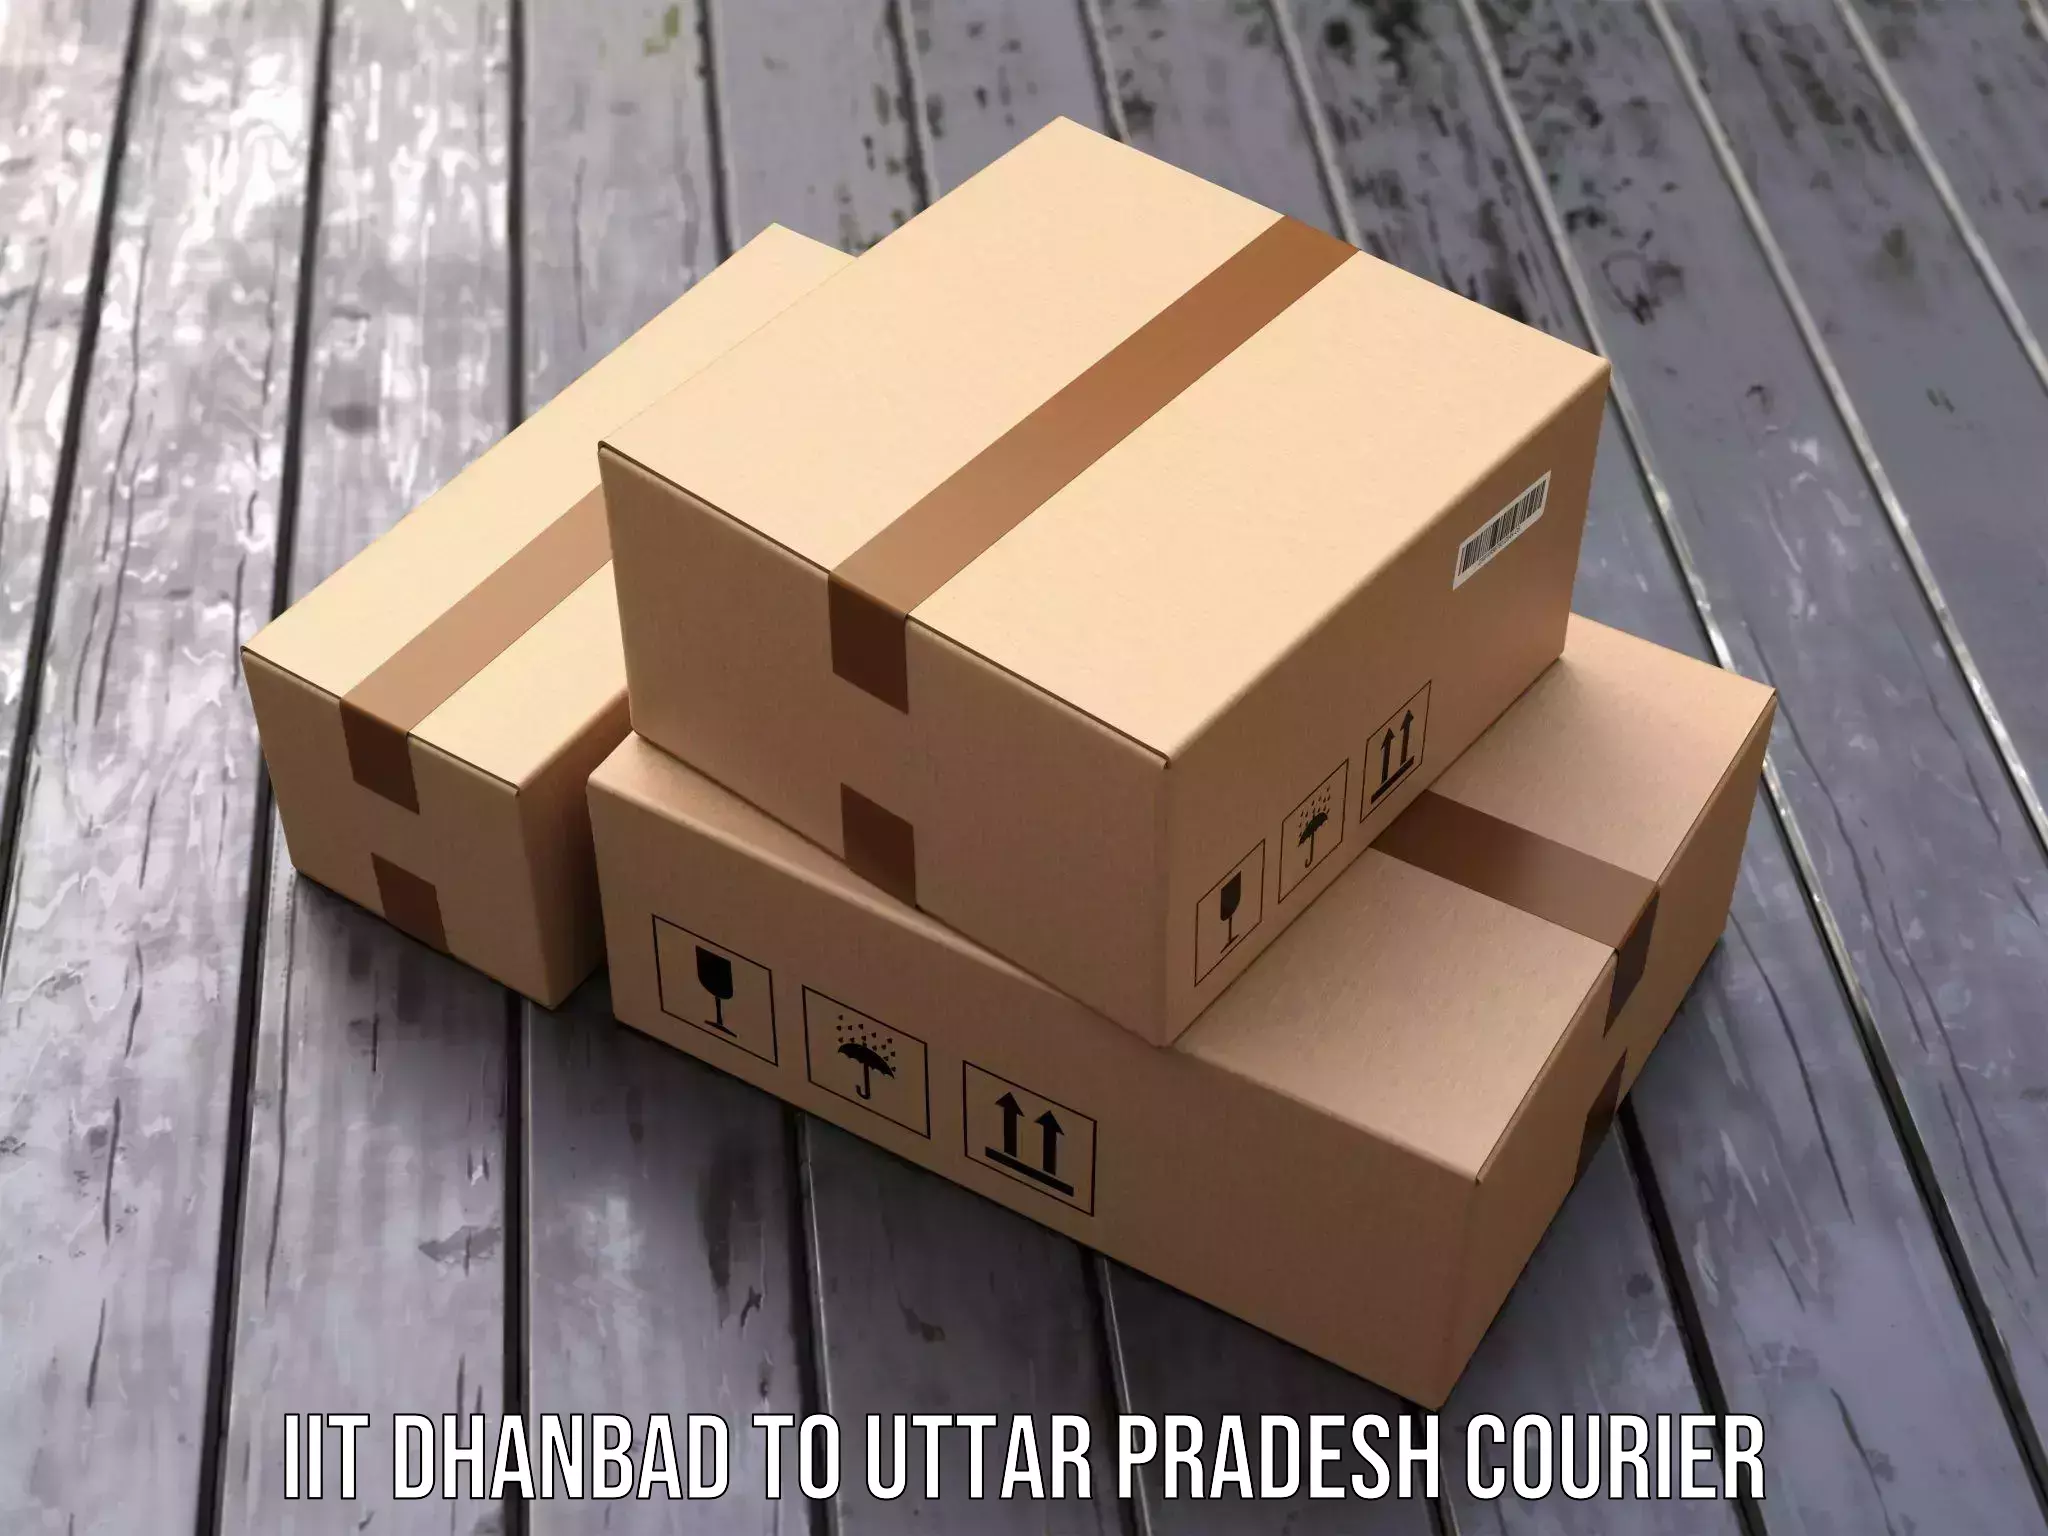 Affordable parcel service IIT Dhanbad to Atarra